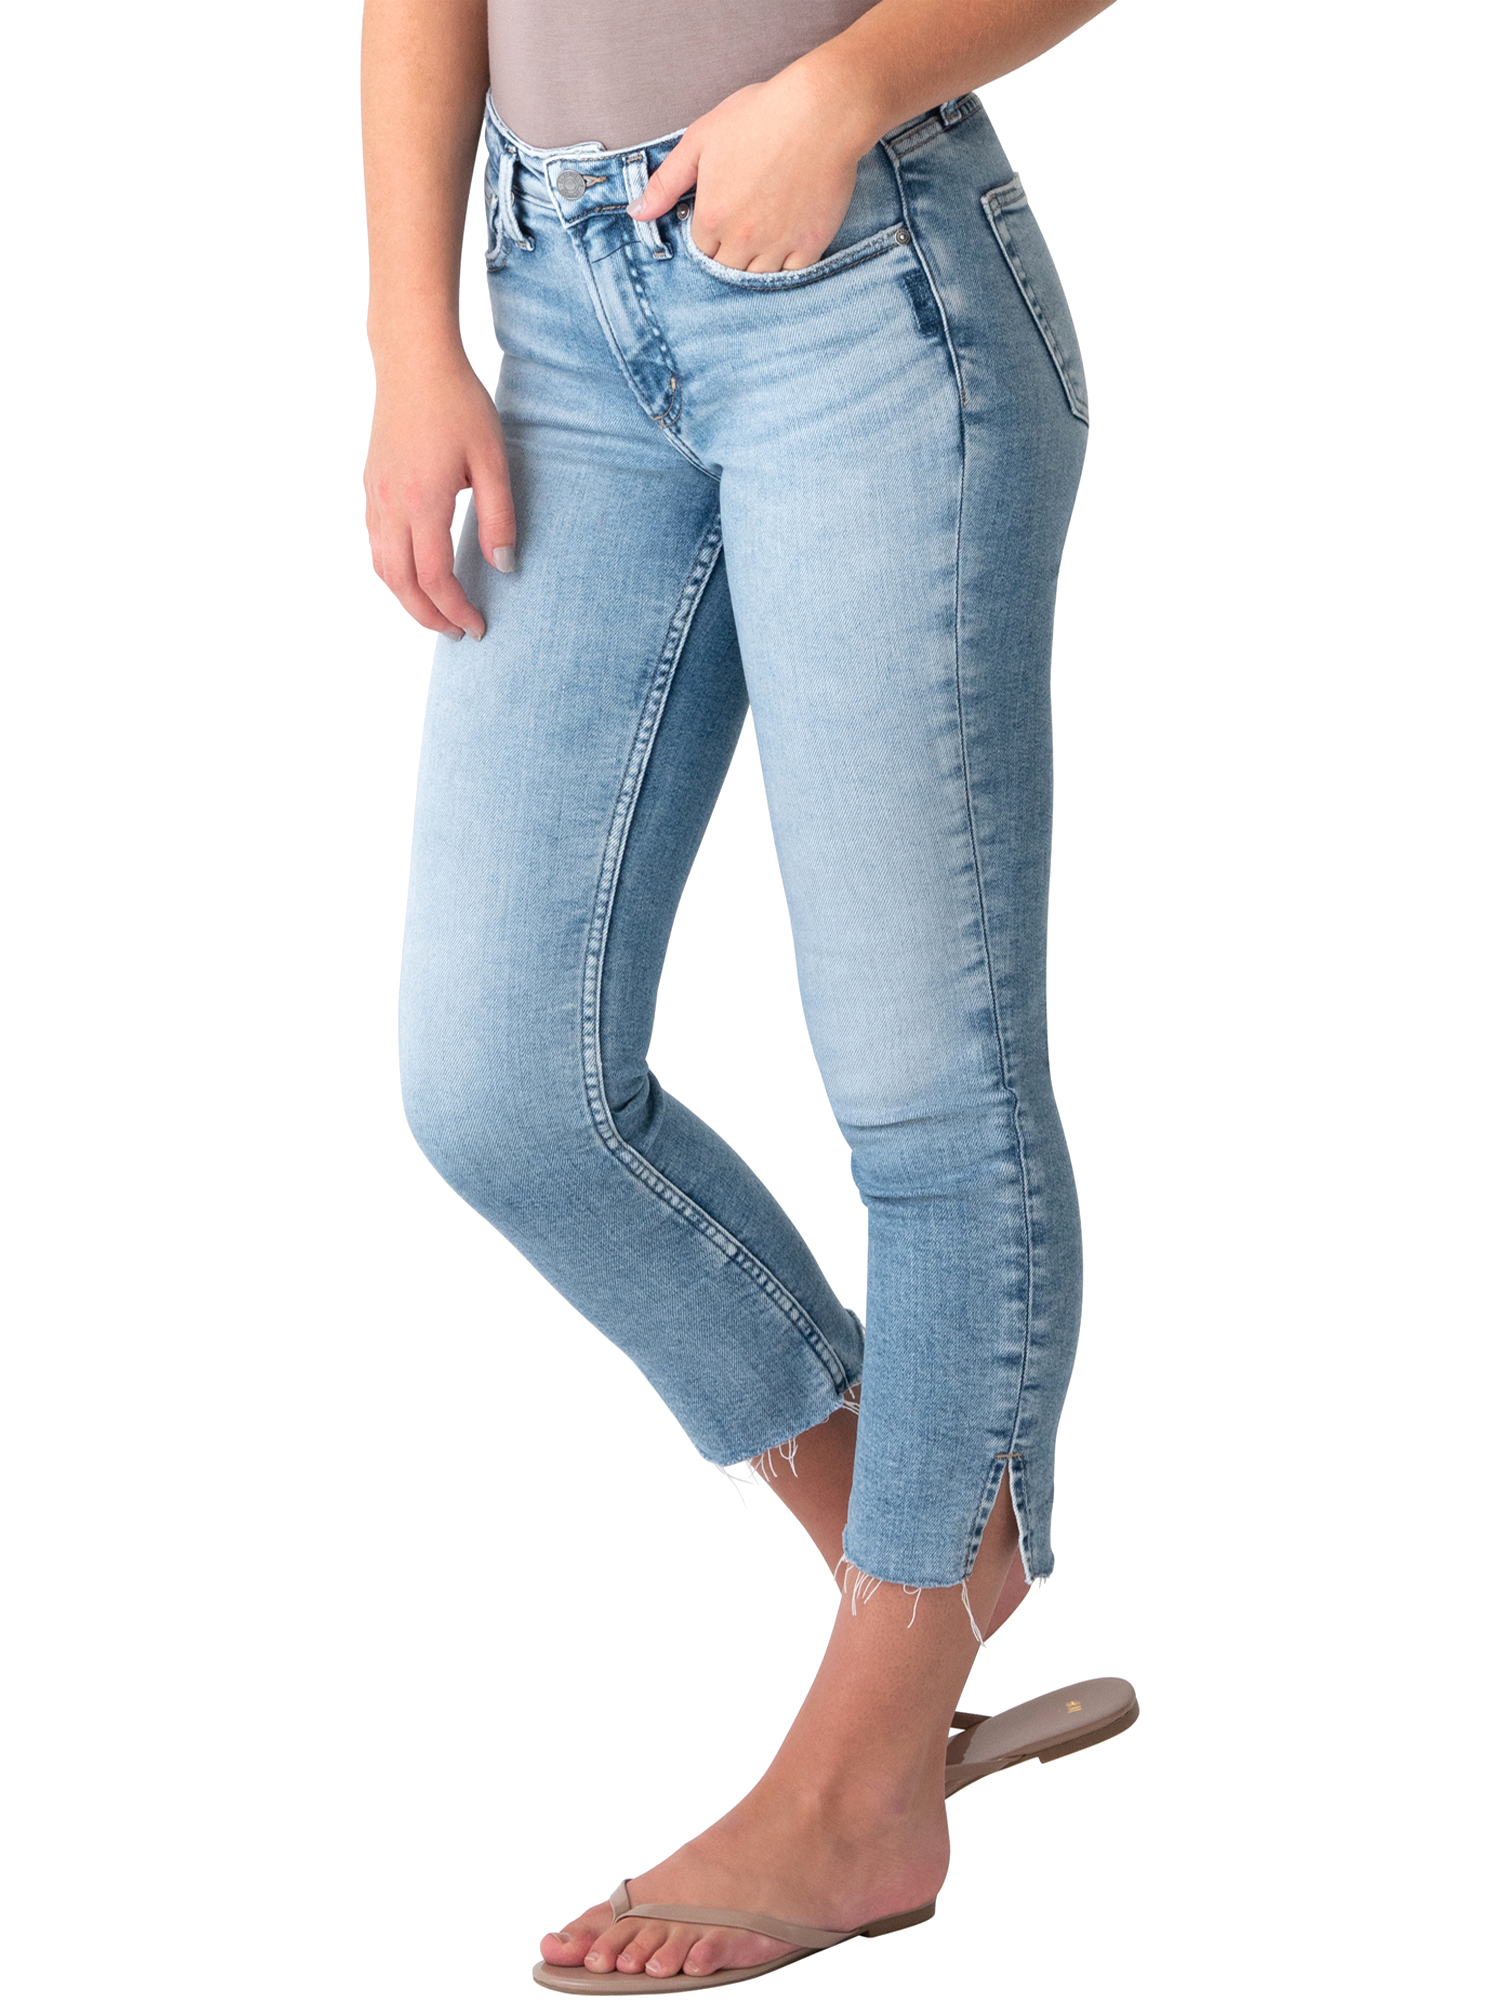 Silver Jeans Co. Women's Most Wanted Mid Rise Straight Crop Jeans Crop, Waist Sizes 24-36 - image 3 of 3